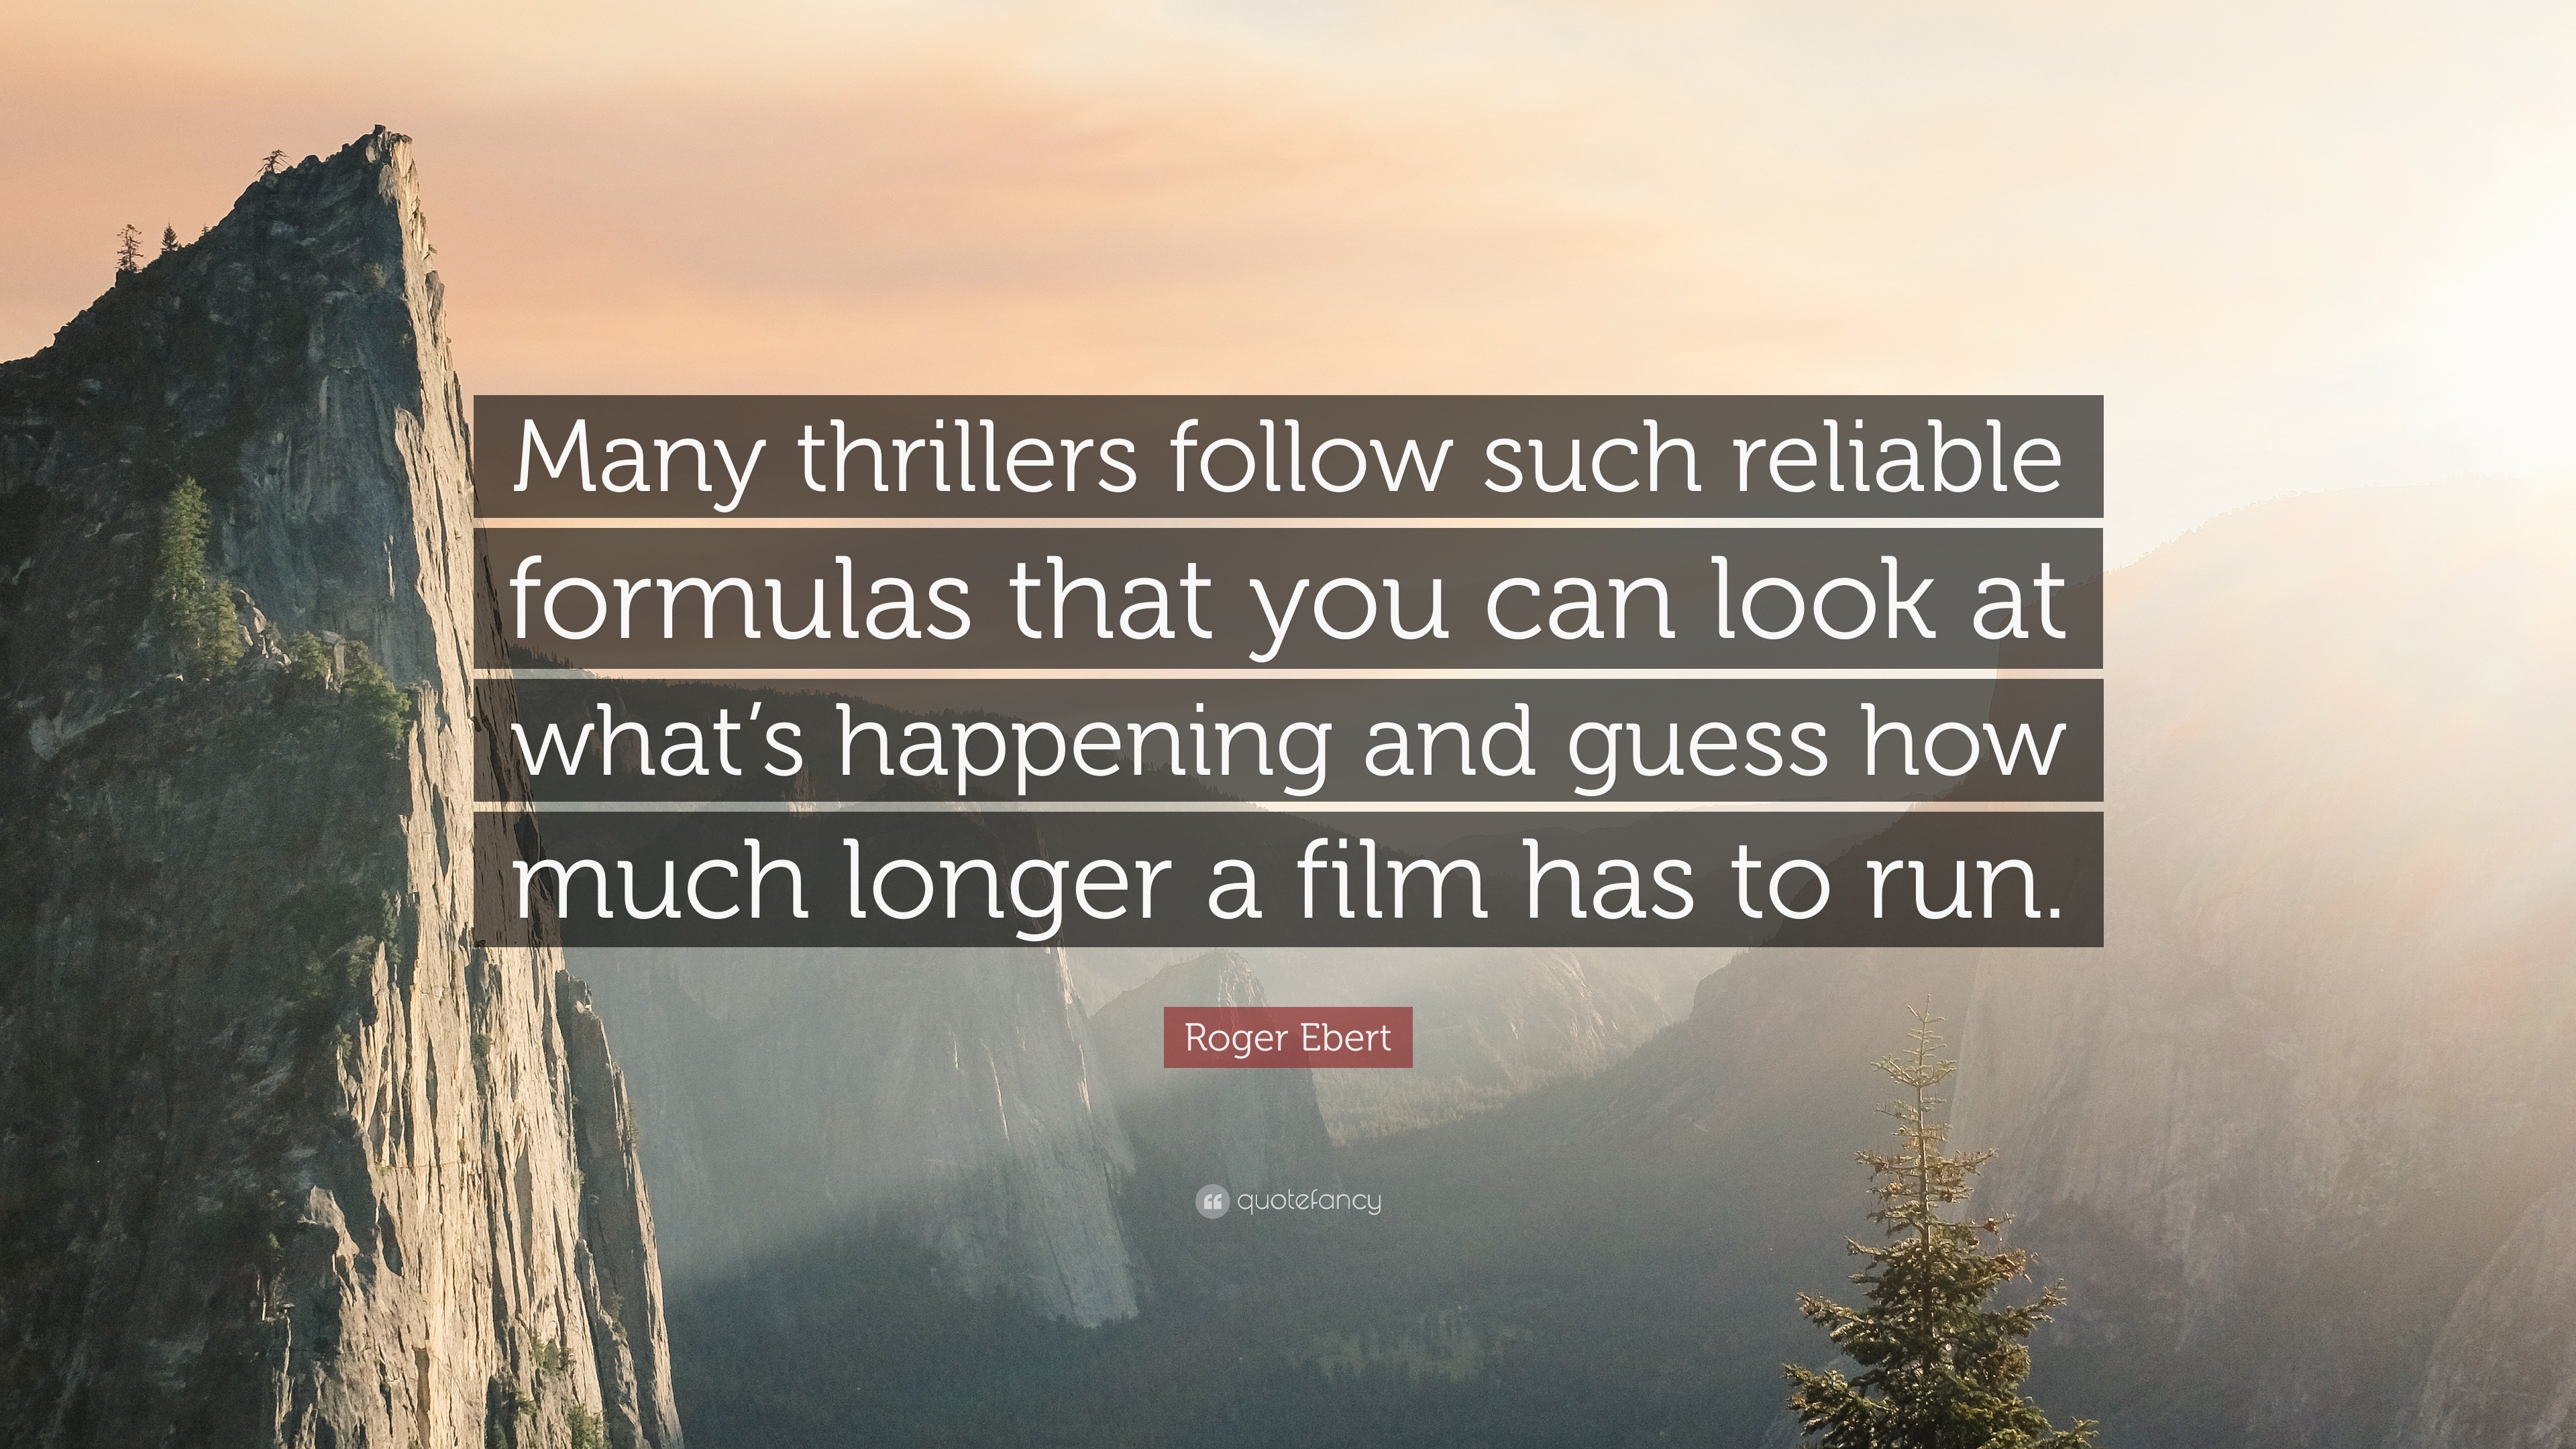 Roger Ebert Quote Many Thrillers Follow Such Reliable Formulas That You Can Look At Whats